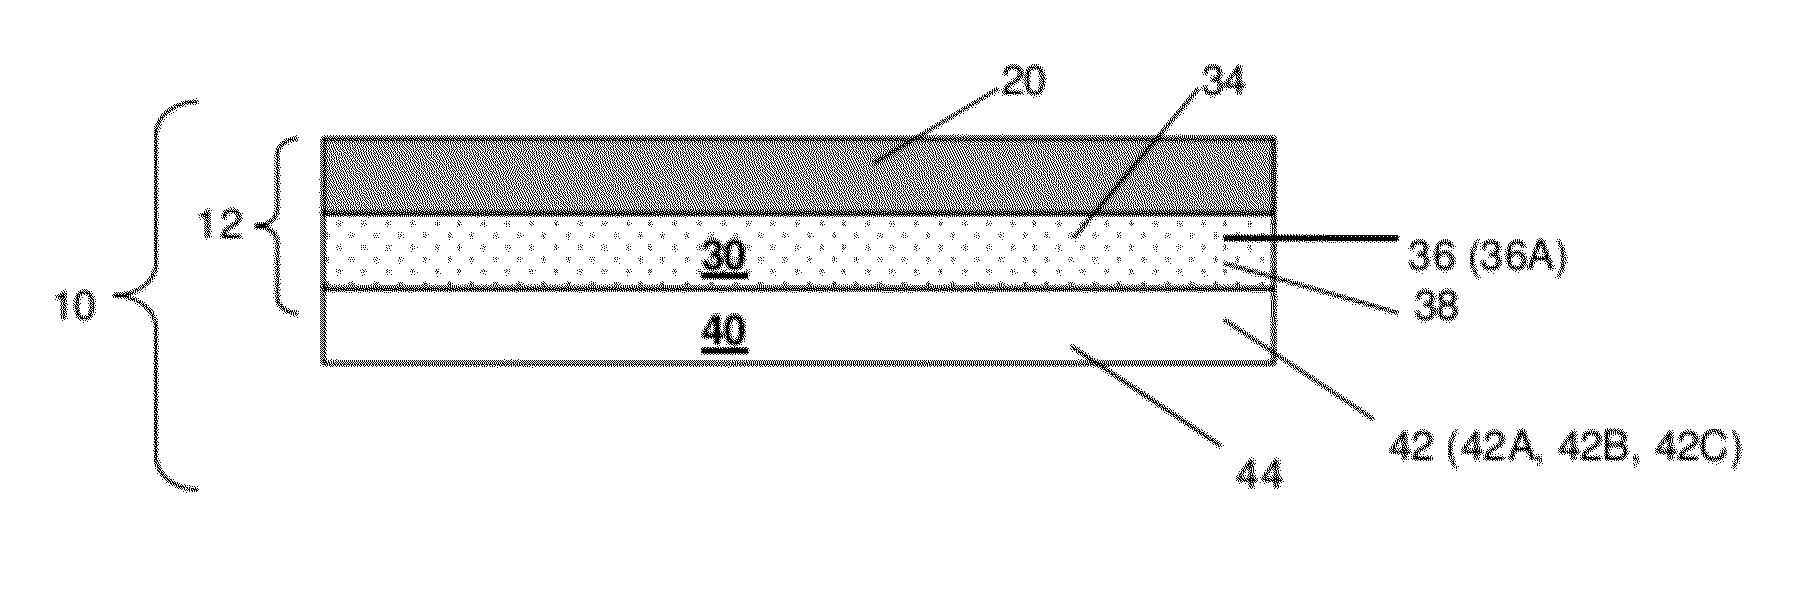 Lithium-based anode with ionic liquid polymer gel